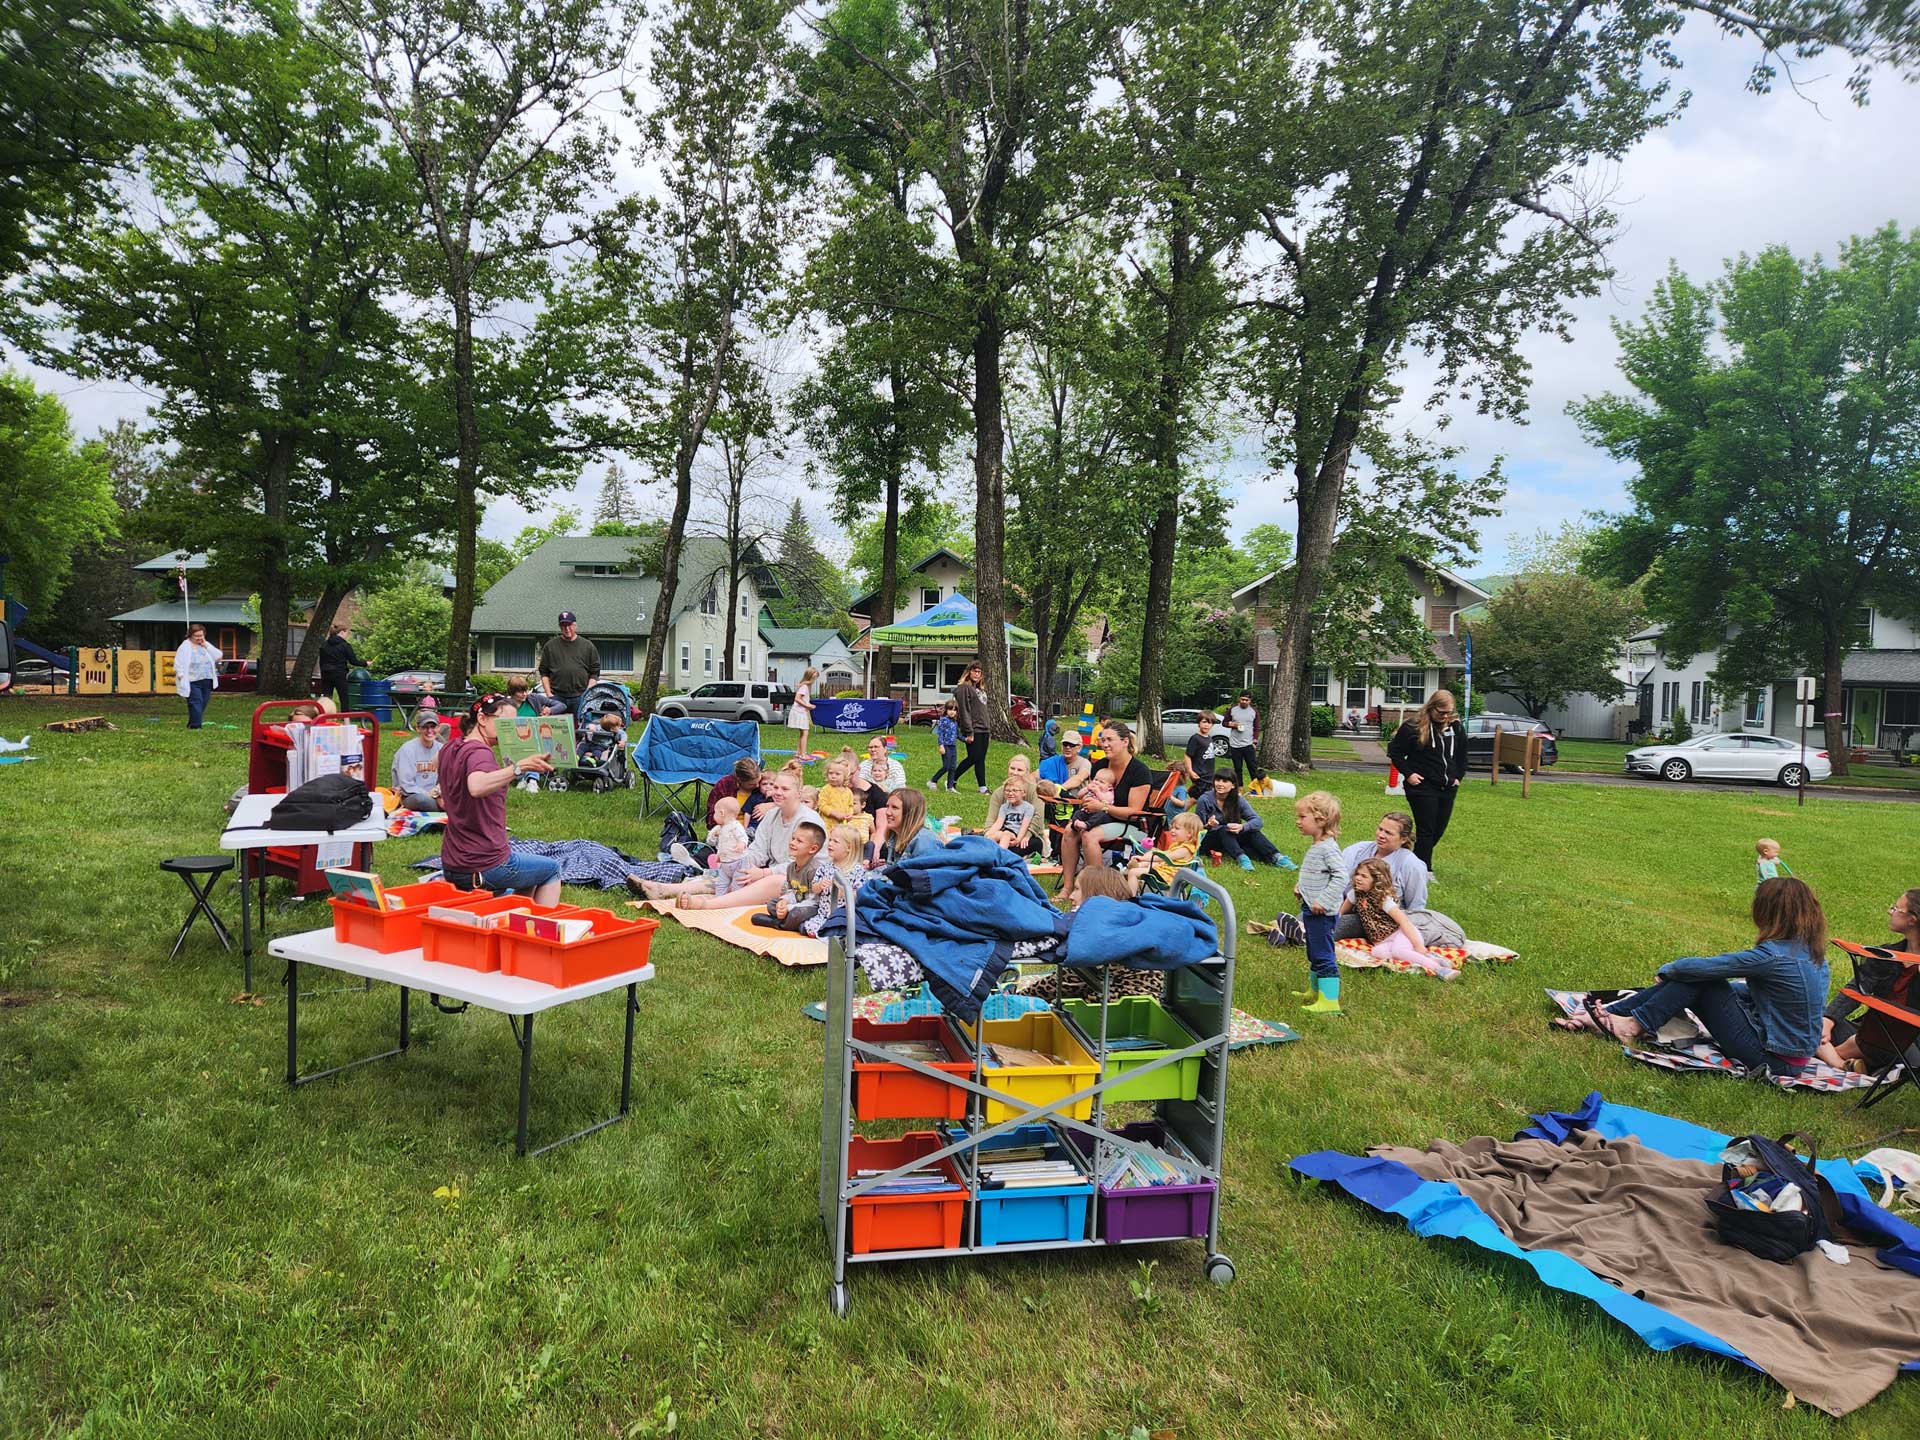 A group of people, including families and children, are enjoying a picnic in a park near the Duluth Public Library. Several blankets are spread out on the grass, and there are tables with bins and a colorful storage cart nearby. Trees and houses are visible in the background.